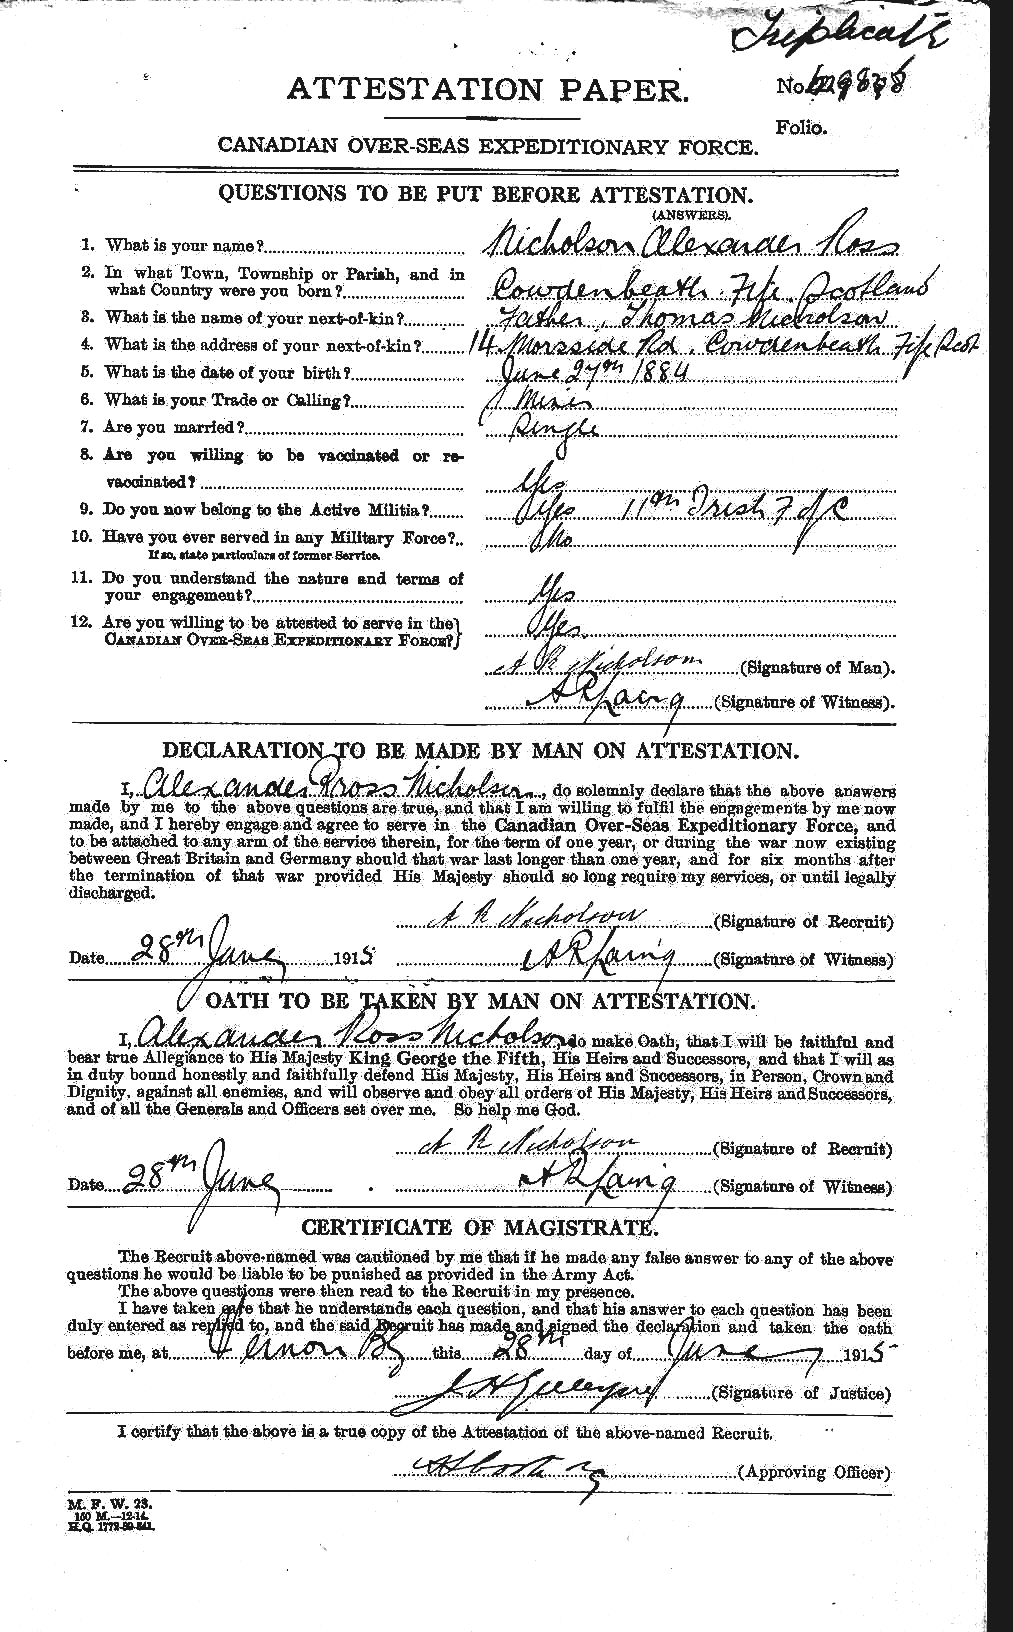 Personnel Records of the First World War - CEF 551094a